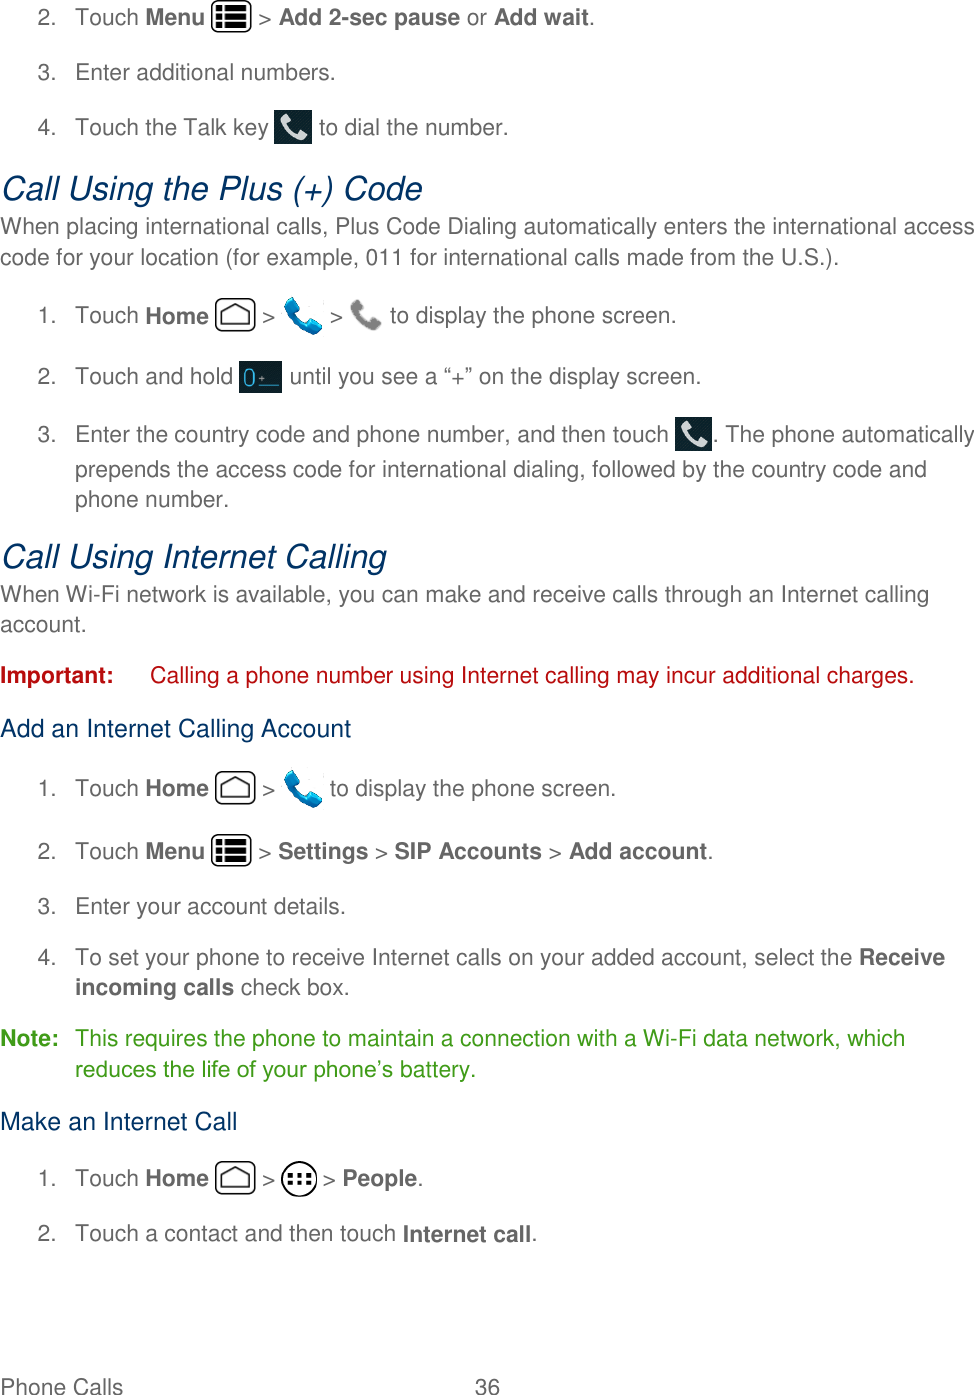 Phone Calls  36   2.  Touch Menu   &gt; Add 2-sec pause or Add wait. 3.  Enter additional numbers. 4.  Touch the Talk key   to dial the number. Call Using the Plus (+) Code When placing international calls, Plus Code Dialing automatically enters the international access code for your location (for example, 011 for international calls made from the U.S.). 1.  Touch Home   &gt;   &gt;   to display the phone screen. 2.  Touch and hold   until you see a “+” on the display screen. 3.  Enter the country code and phone number, and then touch  . The phone automatically prepends the access code for international dialing, followed by the country code and phone number. Call Using Internet Calling When Wi-Fi network is available, you can make and receive calls through an Internet calling account.  Important:  Calling a phone number using Internet calling may incur additional charges.  Add an Internet Calling Account 1.  Touch Home   &gt;   to display the phone screen. 2.  Touch Menu   &gt; Settings &gt; SIP Accounts &gt; Add account.  3.  Enter your account details. 4.  To set your phone to receive Internet calls on your added account, select the Receive incoming calls check box. Note:  This requires the phone to maintain a connection with a Wi-Fi data network, which reduces the life of your phone’s battery. Make an Internet Call 1.  Touch Home   &gt;   &gt; People. 2.  Touch a contact and then touch Internet call. 